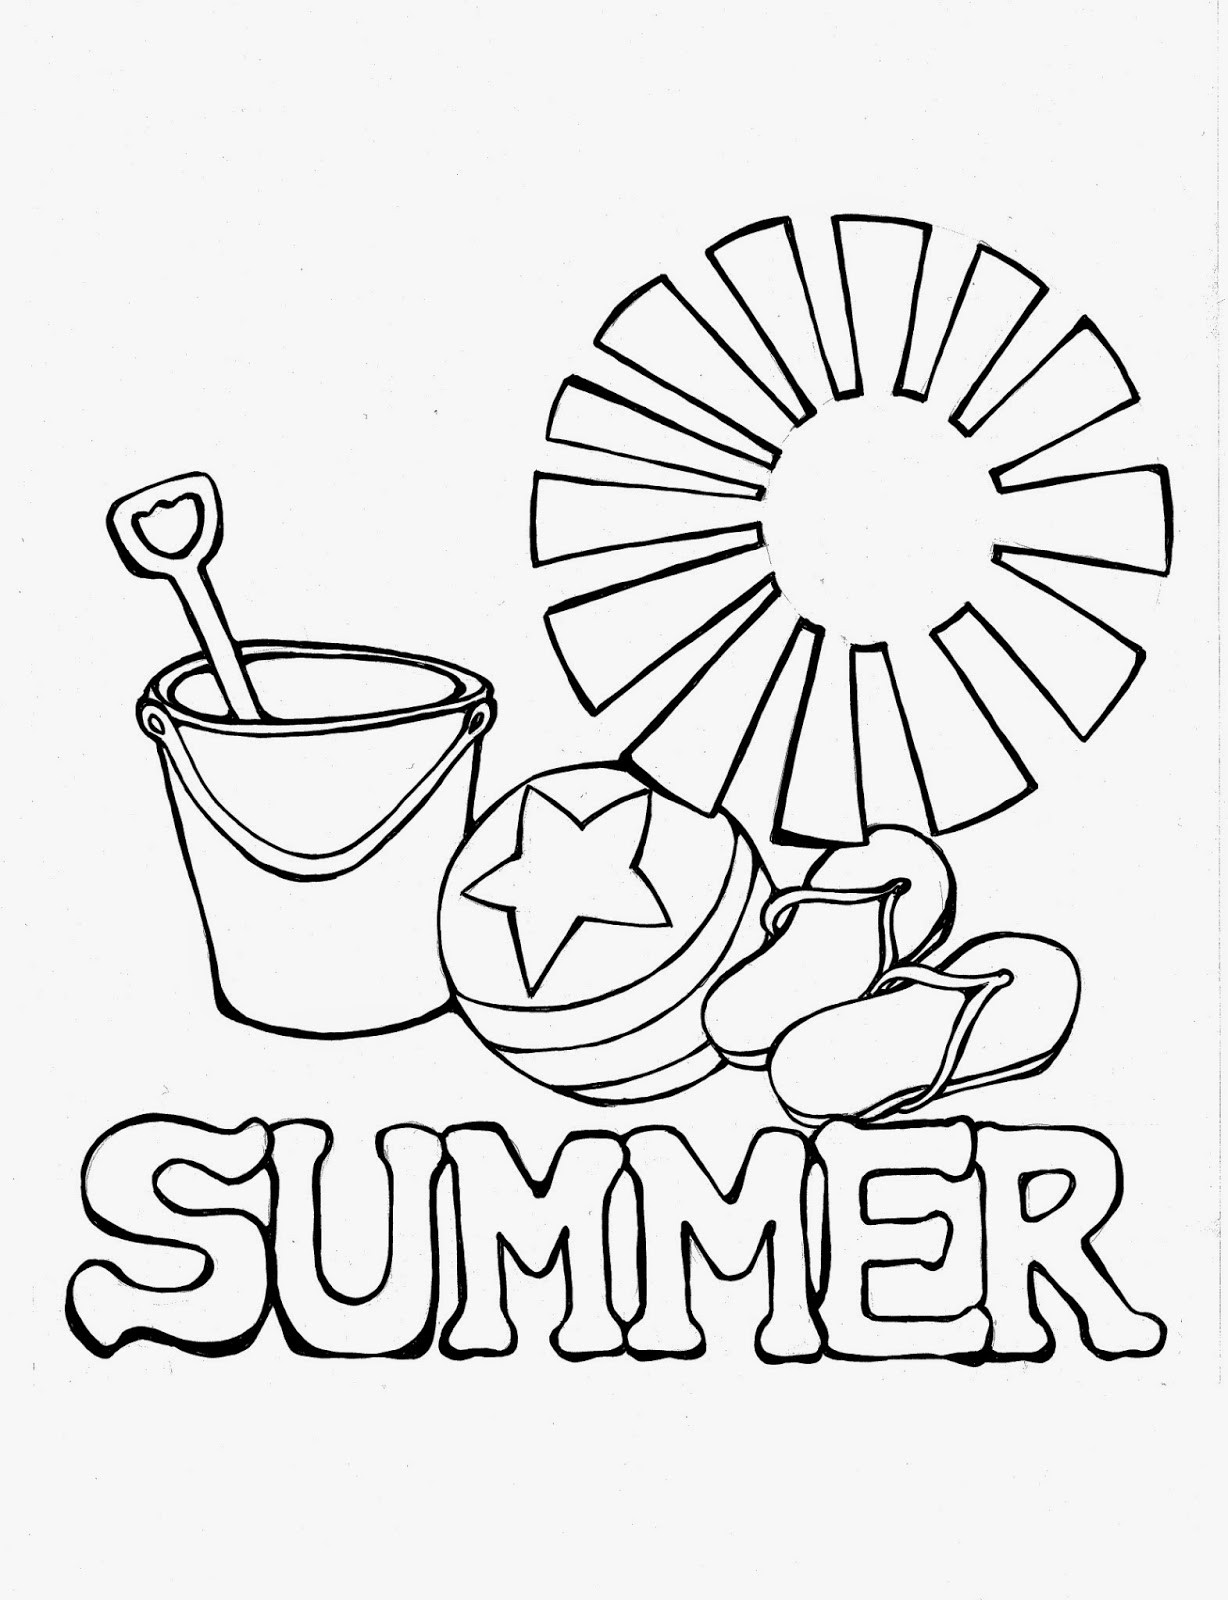 Summer Coloring Pages For Toddlers
 